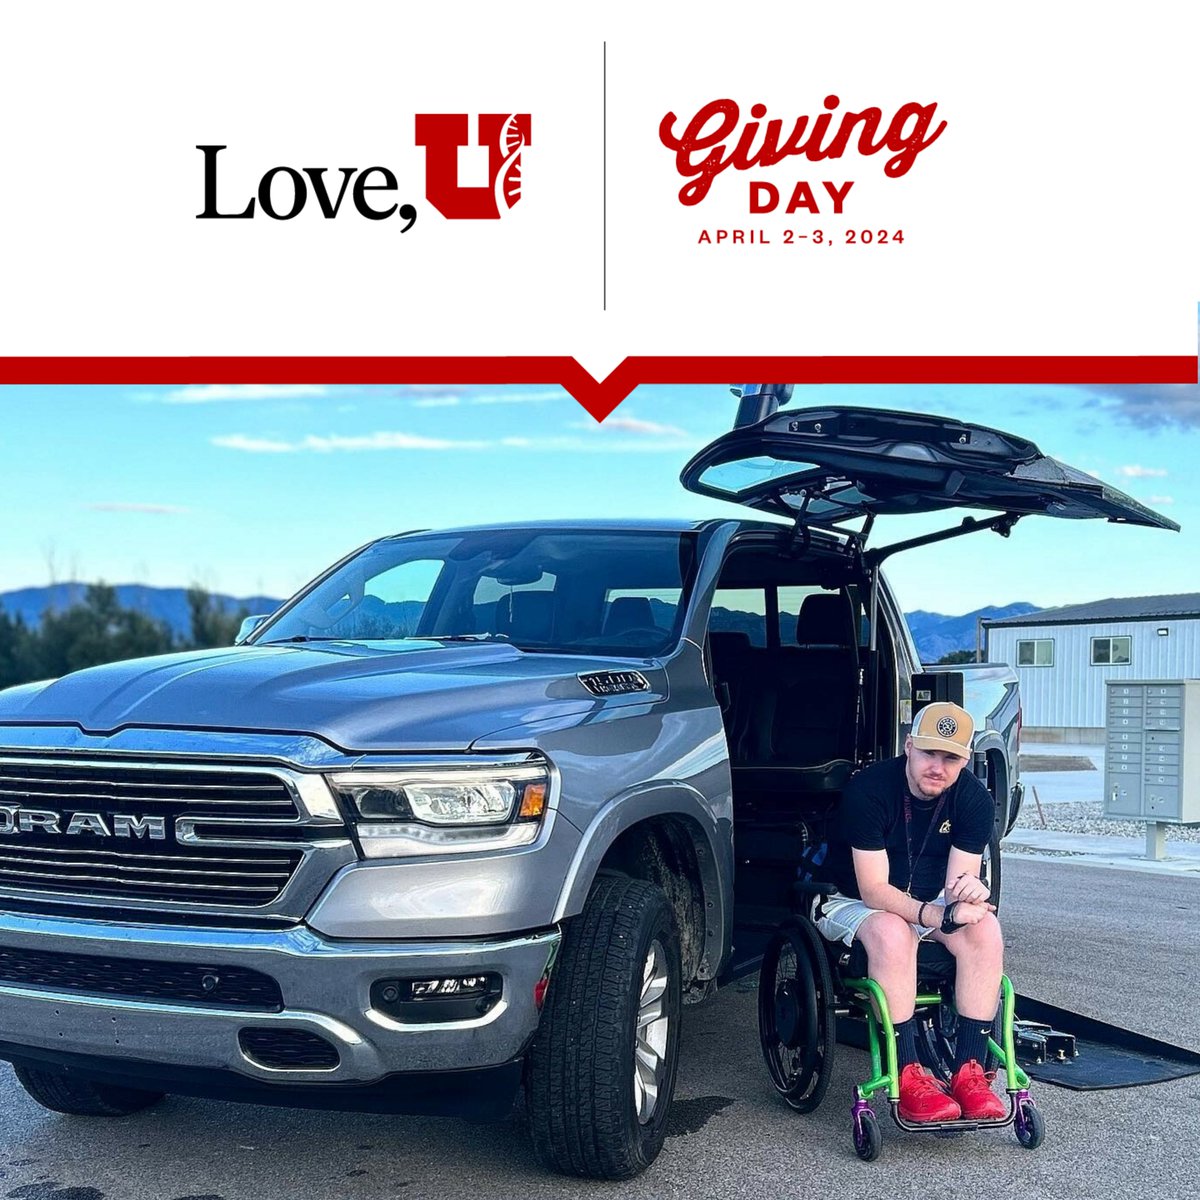 TOMORROW! Join us on Giving Day to support the Craig H. Neilsen Rehabilitation Hospital Patient Experience and Enrichment Fund! Together we can amplify our impact of transforming lives through innovative care and quality-of-life programs. Give early: uofuhealth.org/NeilsenHospita…